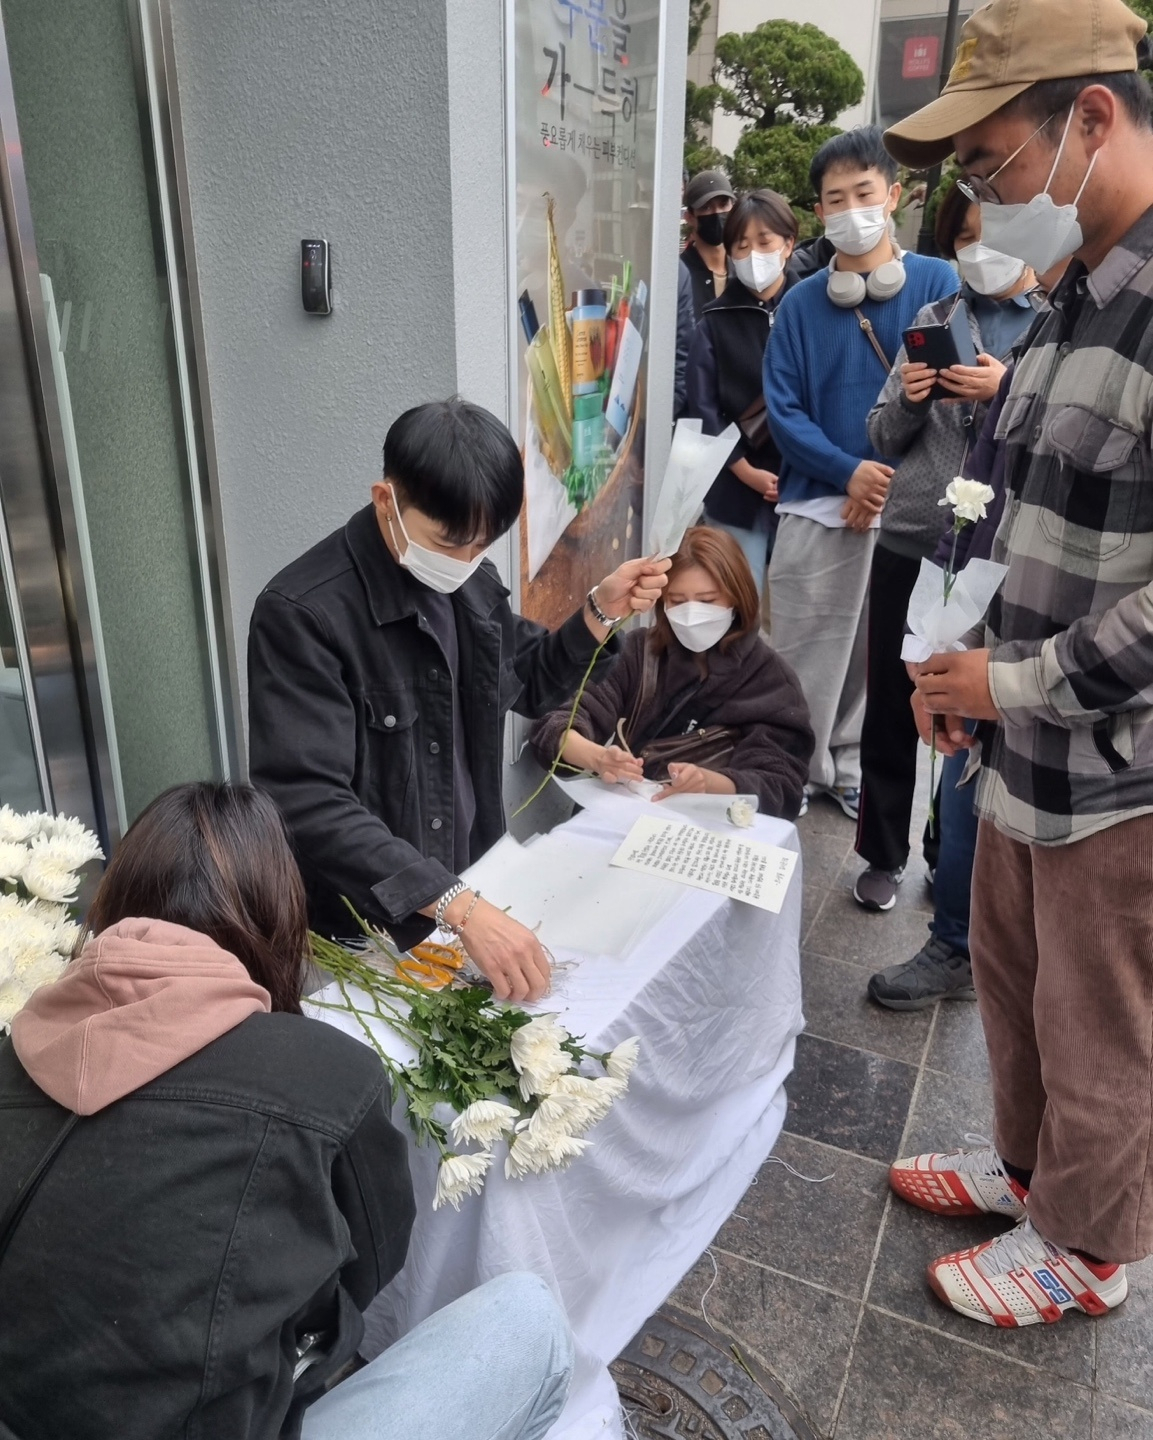 Kim Seo-joon gives out free flowers to mourners in front of Exit 1 of Itaewon Station inYongsan-gu, Seoul, Wednesday. (Choi Jae-hee / The Korea Herald)